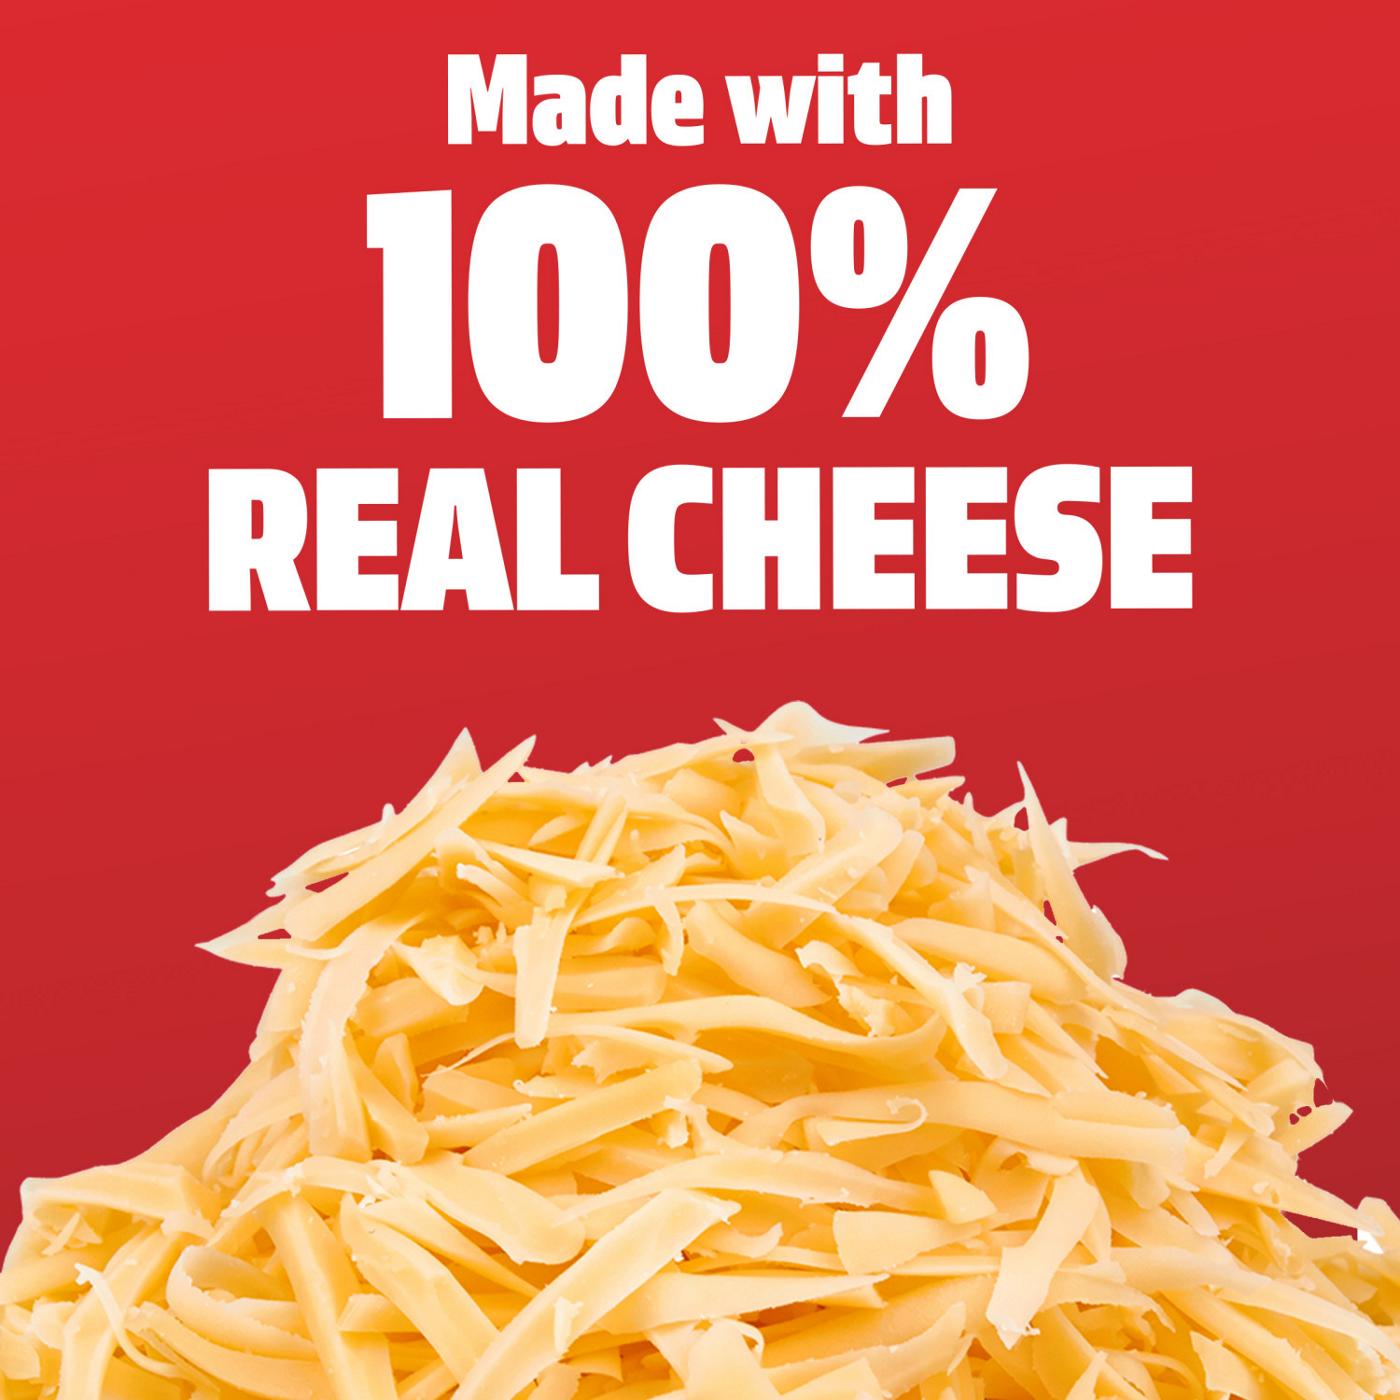 Hot Pockets Four Cheese Pizza Garlic Buttery Crust Frozen Snacks, Pizza Snacks Made with Real Cheese, 5 Count Frozen Sandwiches 21.25 oz.; image 6 of 6